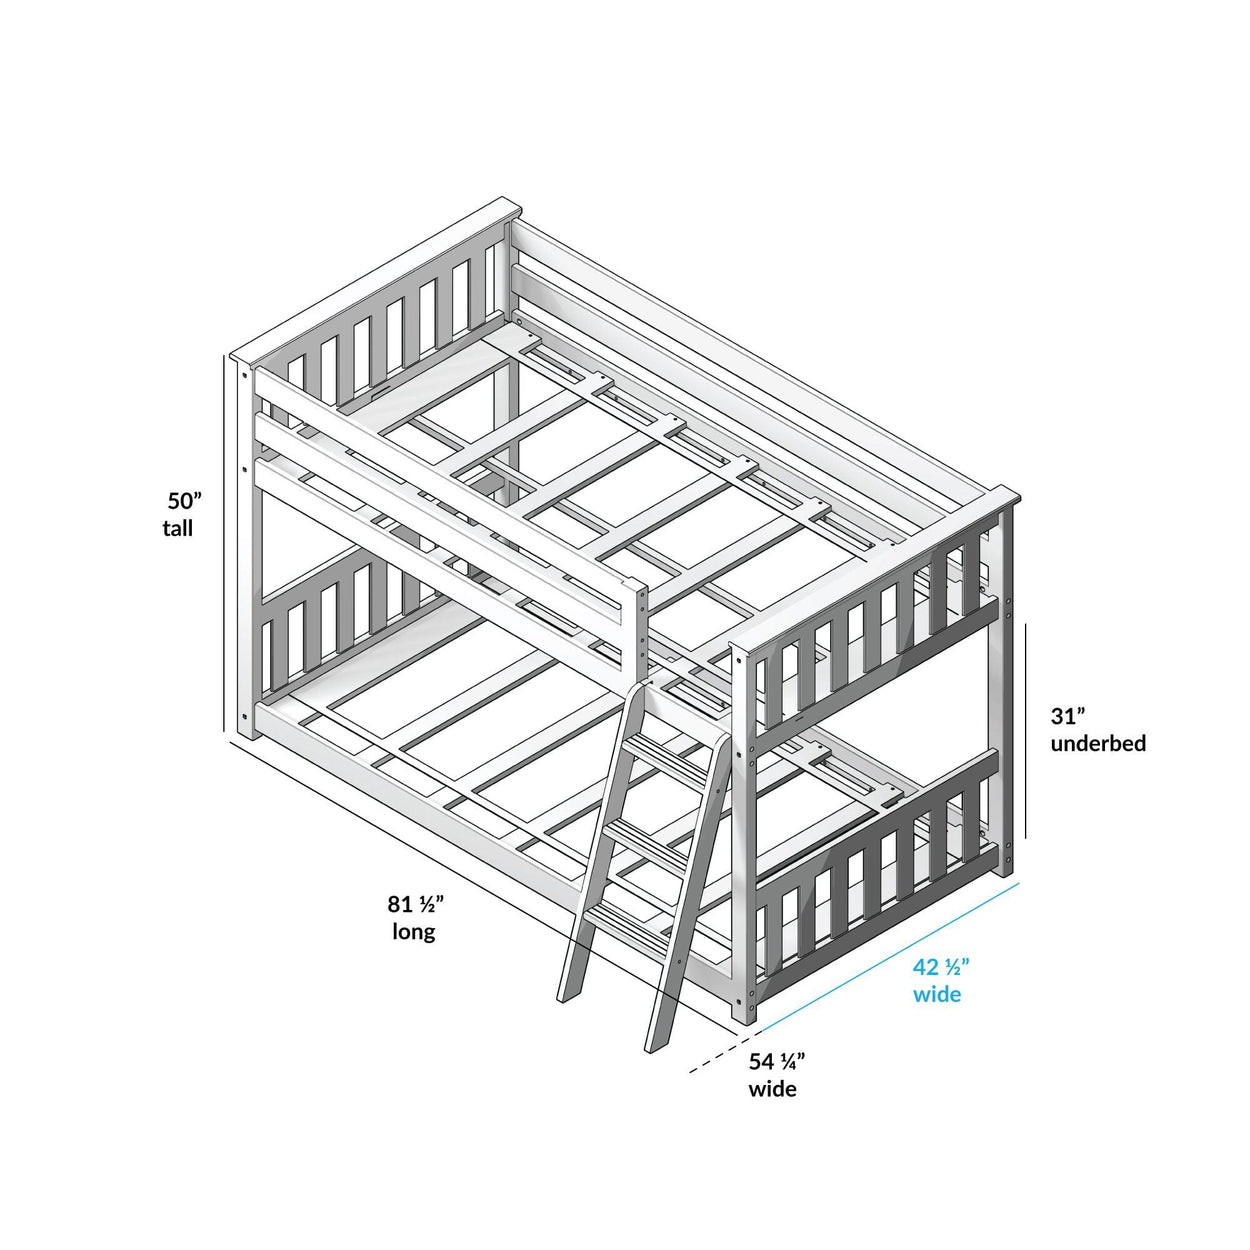 180214121209 : Bunk Beds Twin over Twin Low Bunk with Two Guard Rails, Grey